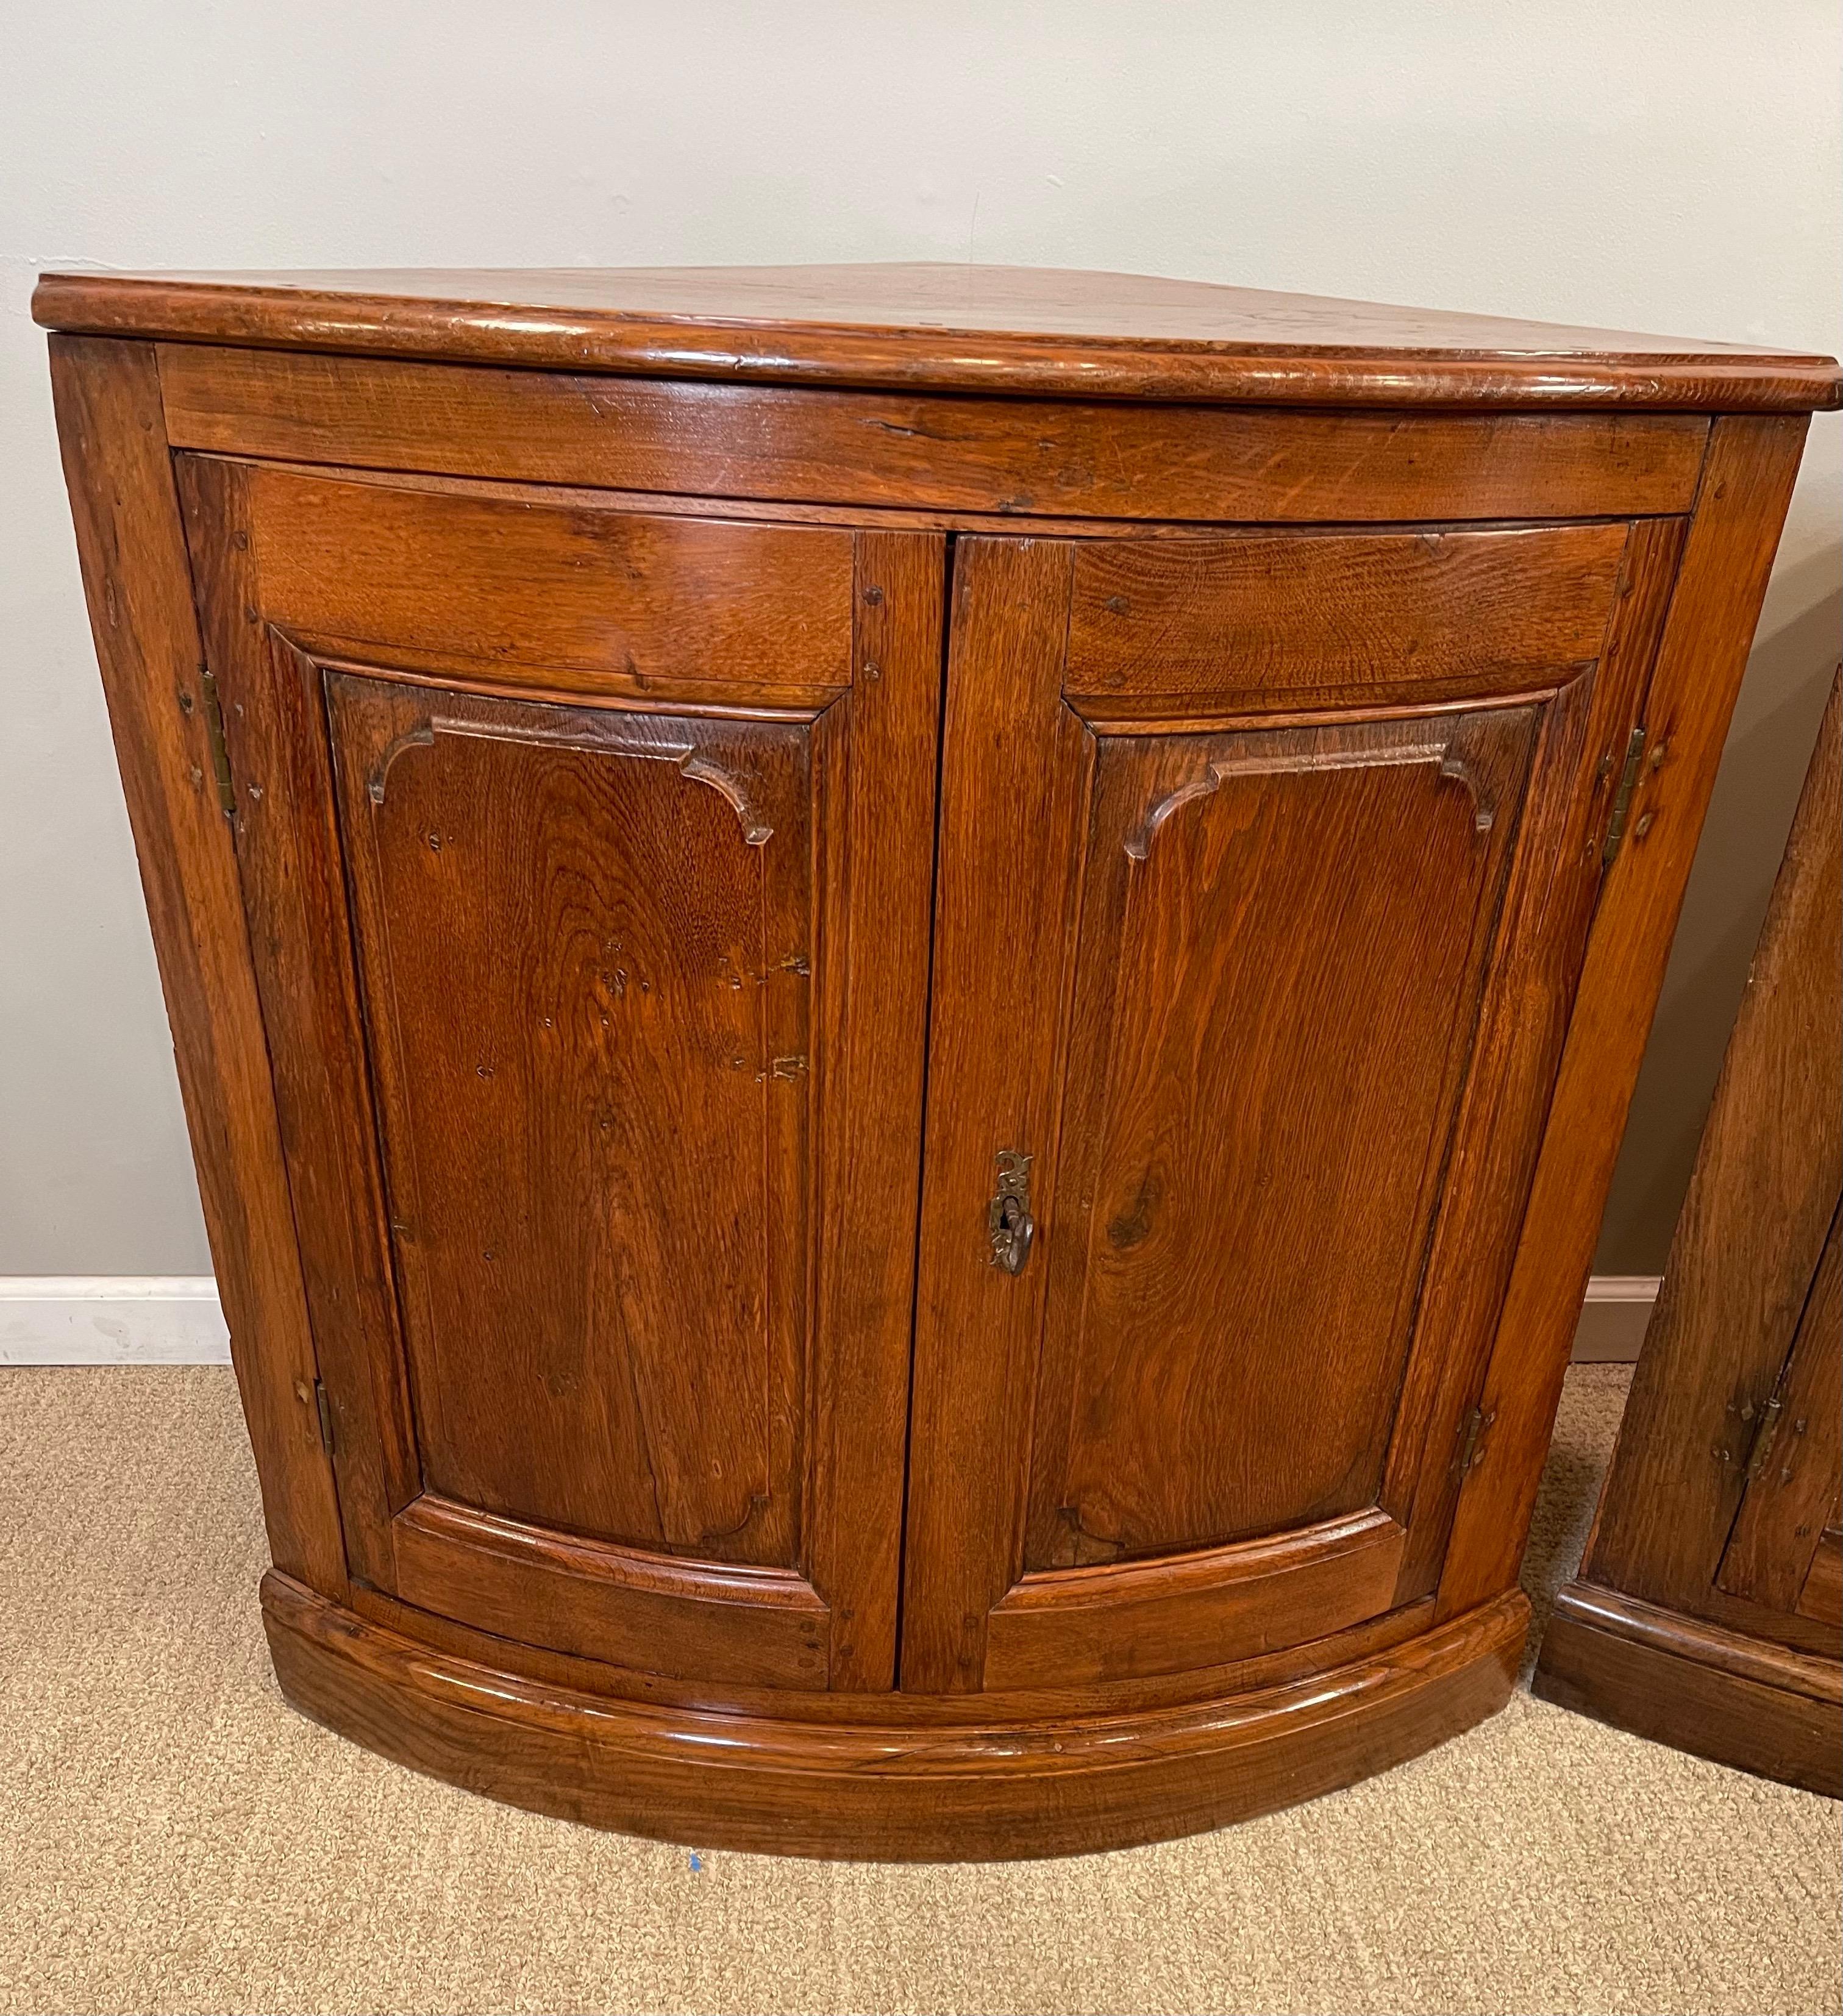 A Pair of late 17th century oak corner cabinets 
Each with an interior shelf. Left door latches with a locking right door. Doors with with raised beveled panels. Each cabinet retaining it’s original lock and key.